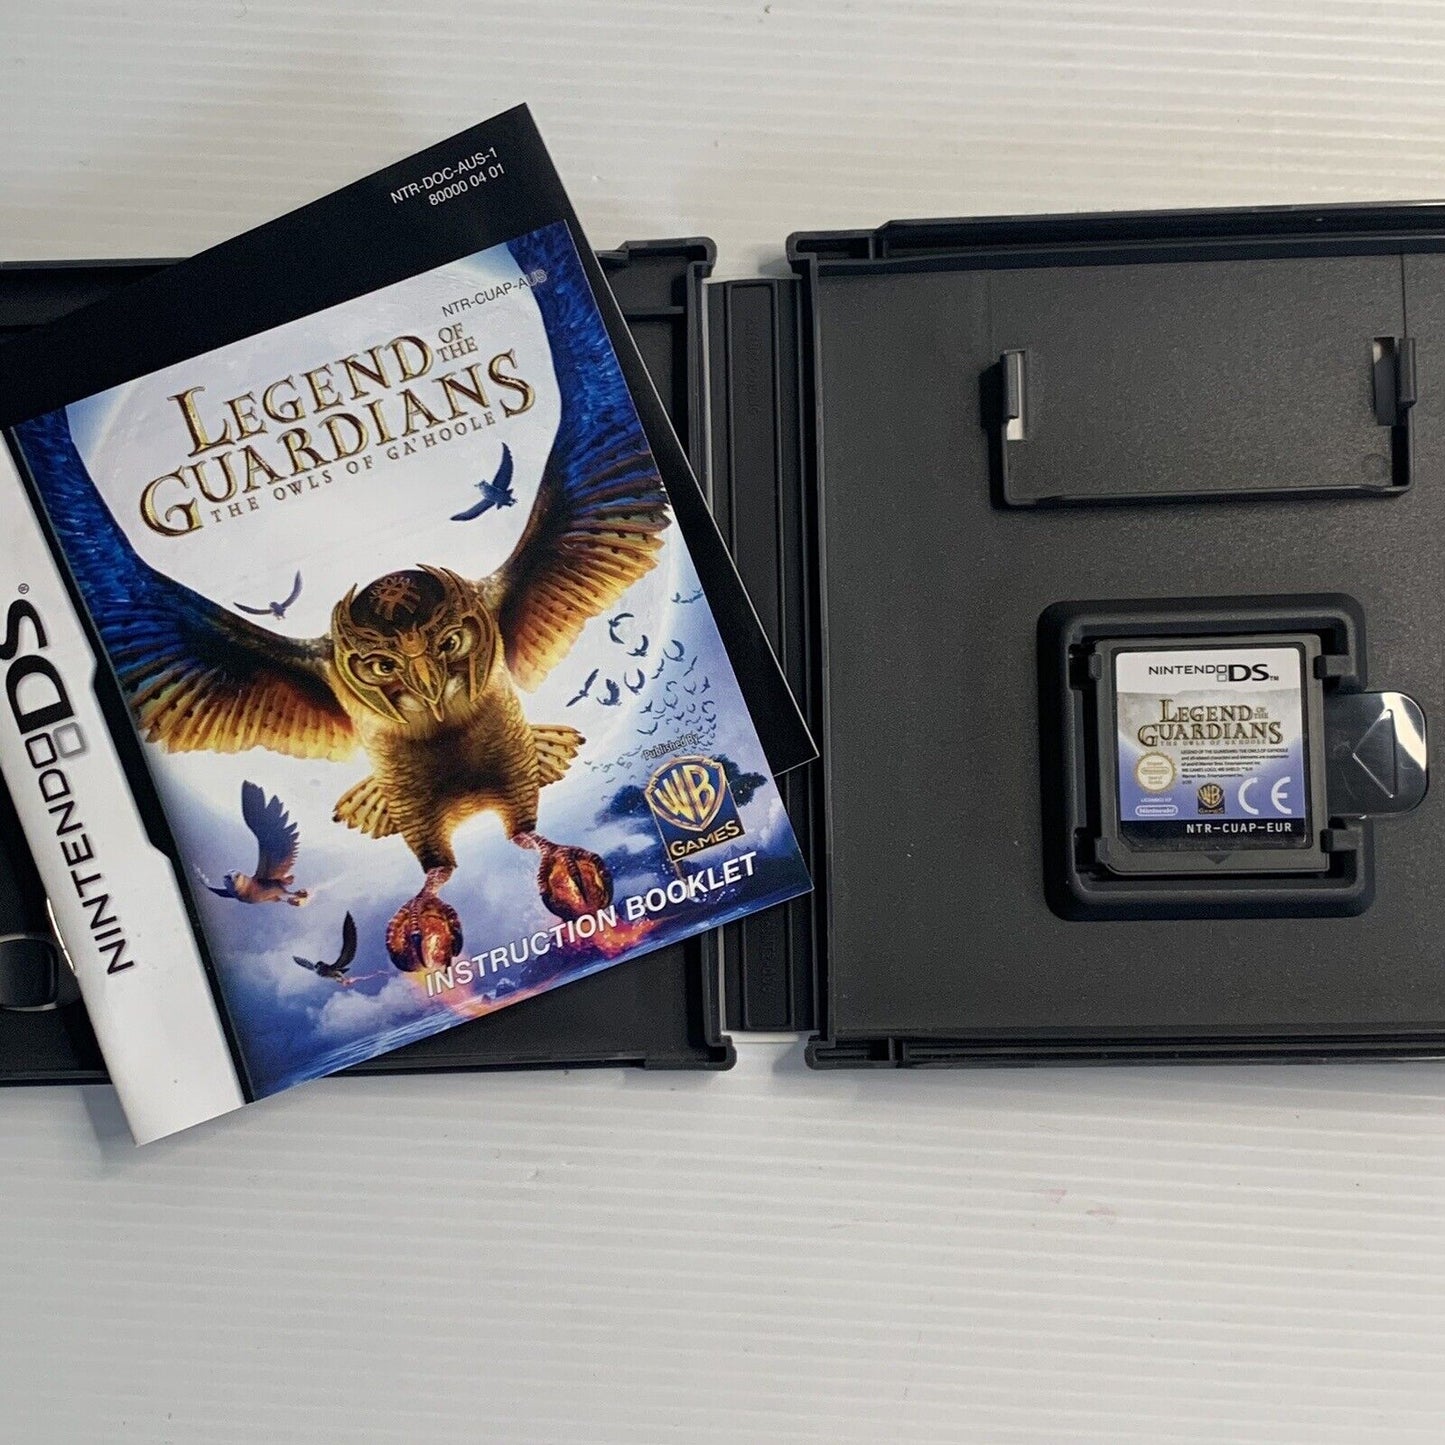 Legend of the Guardians The Owls of Ga'Hoole Nintendo DS Game